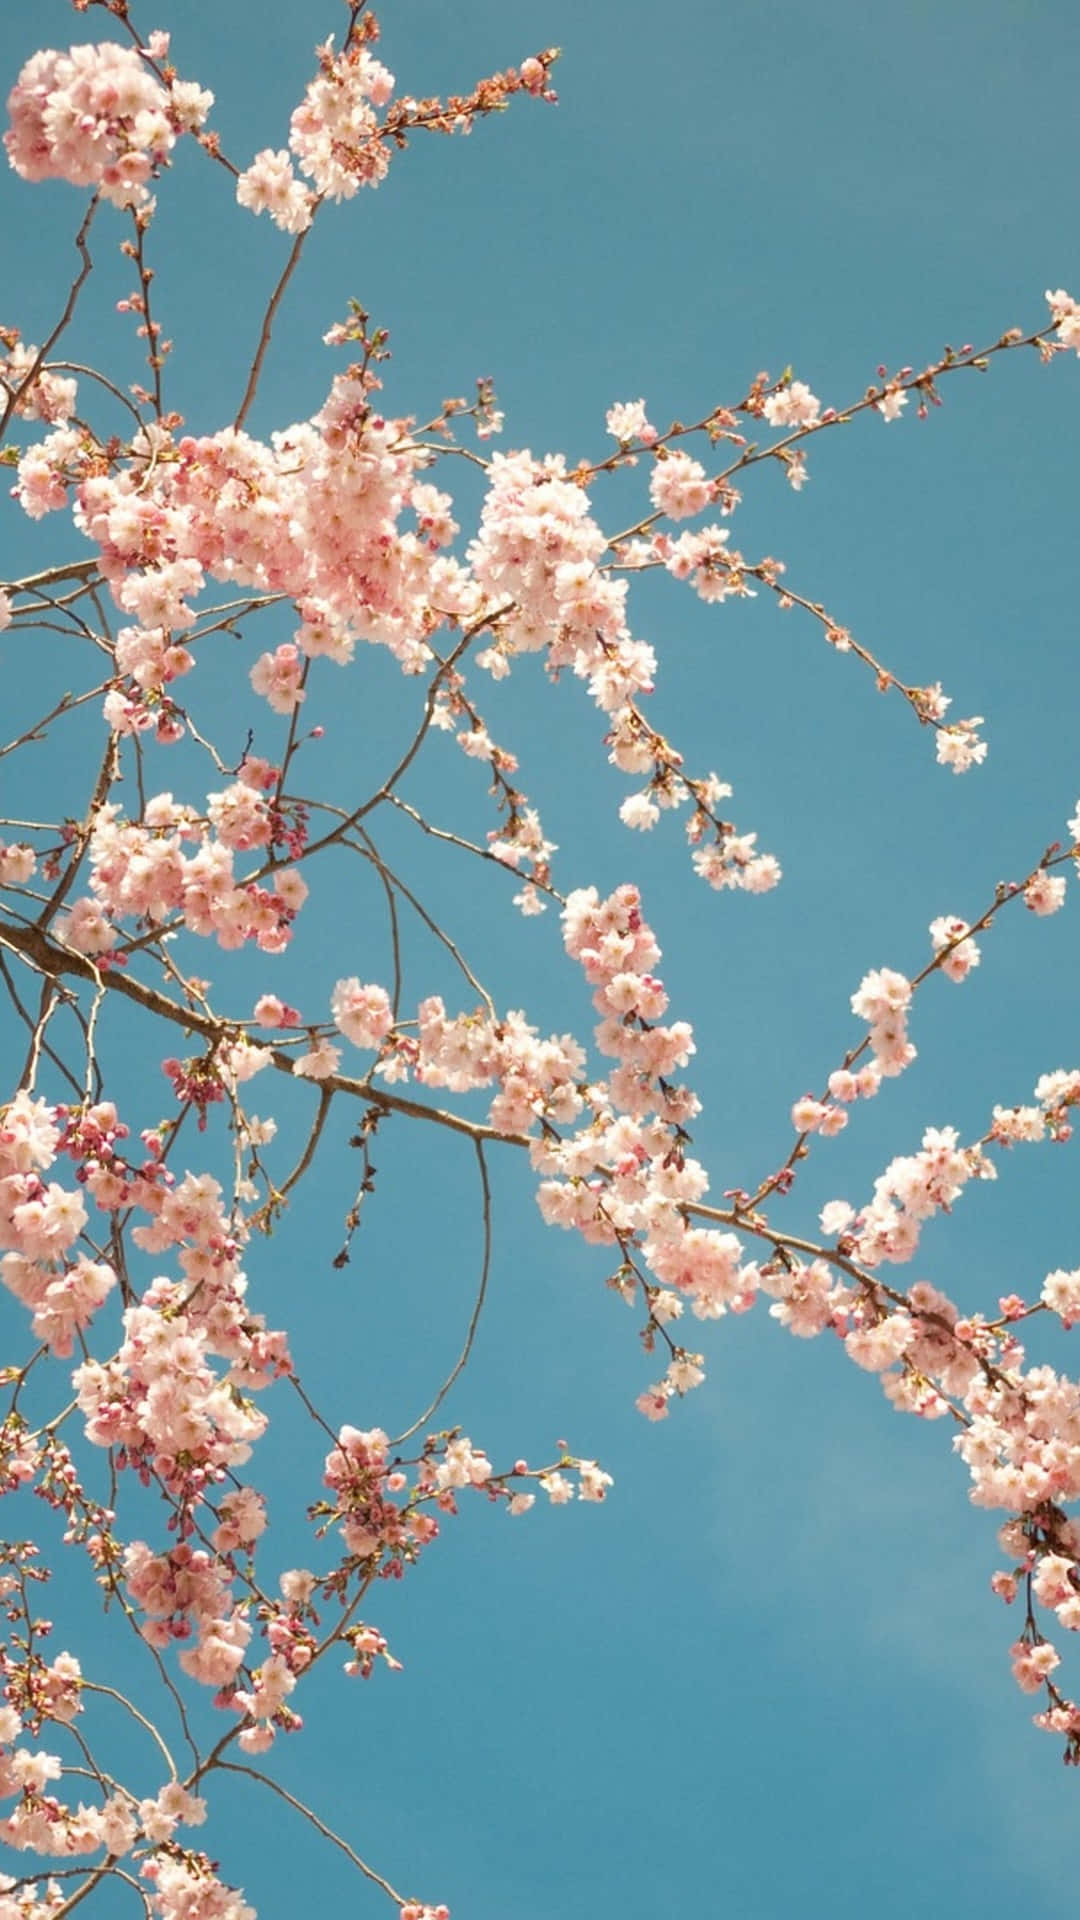 Enjoy the beauty of spring with this vibrant iPhone background